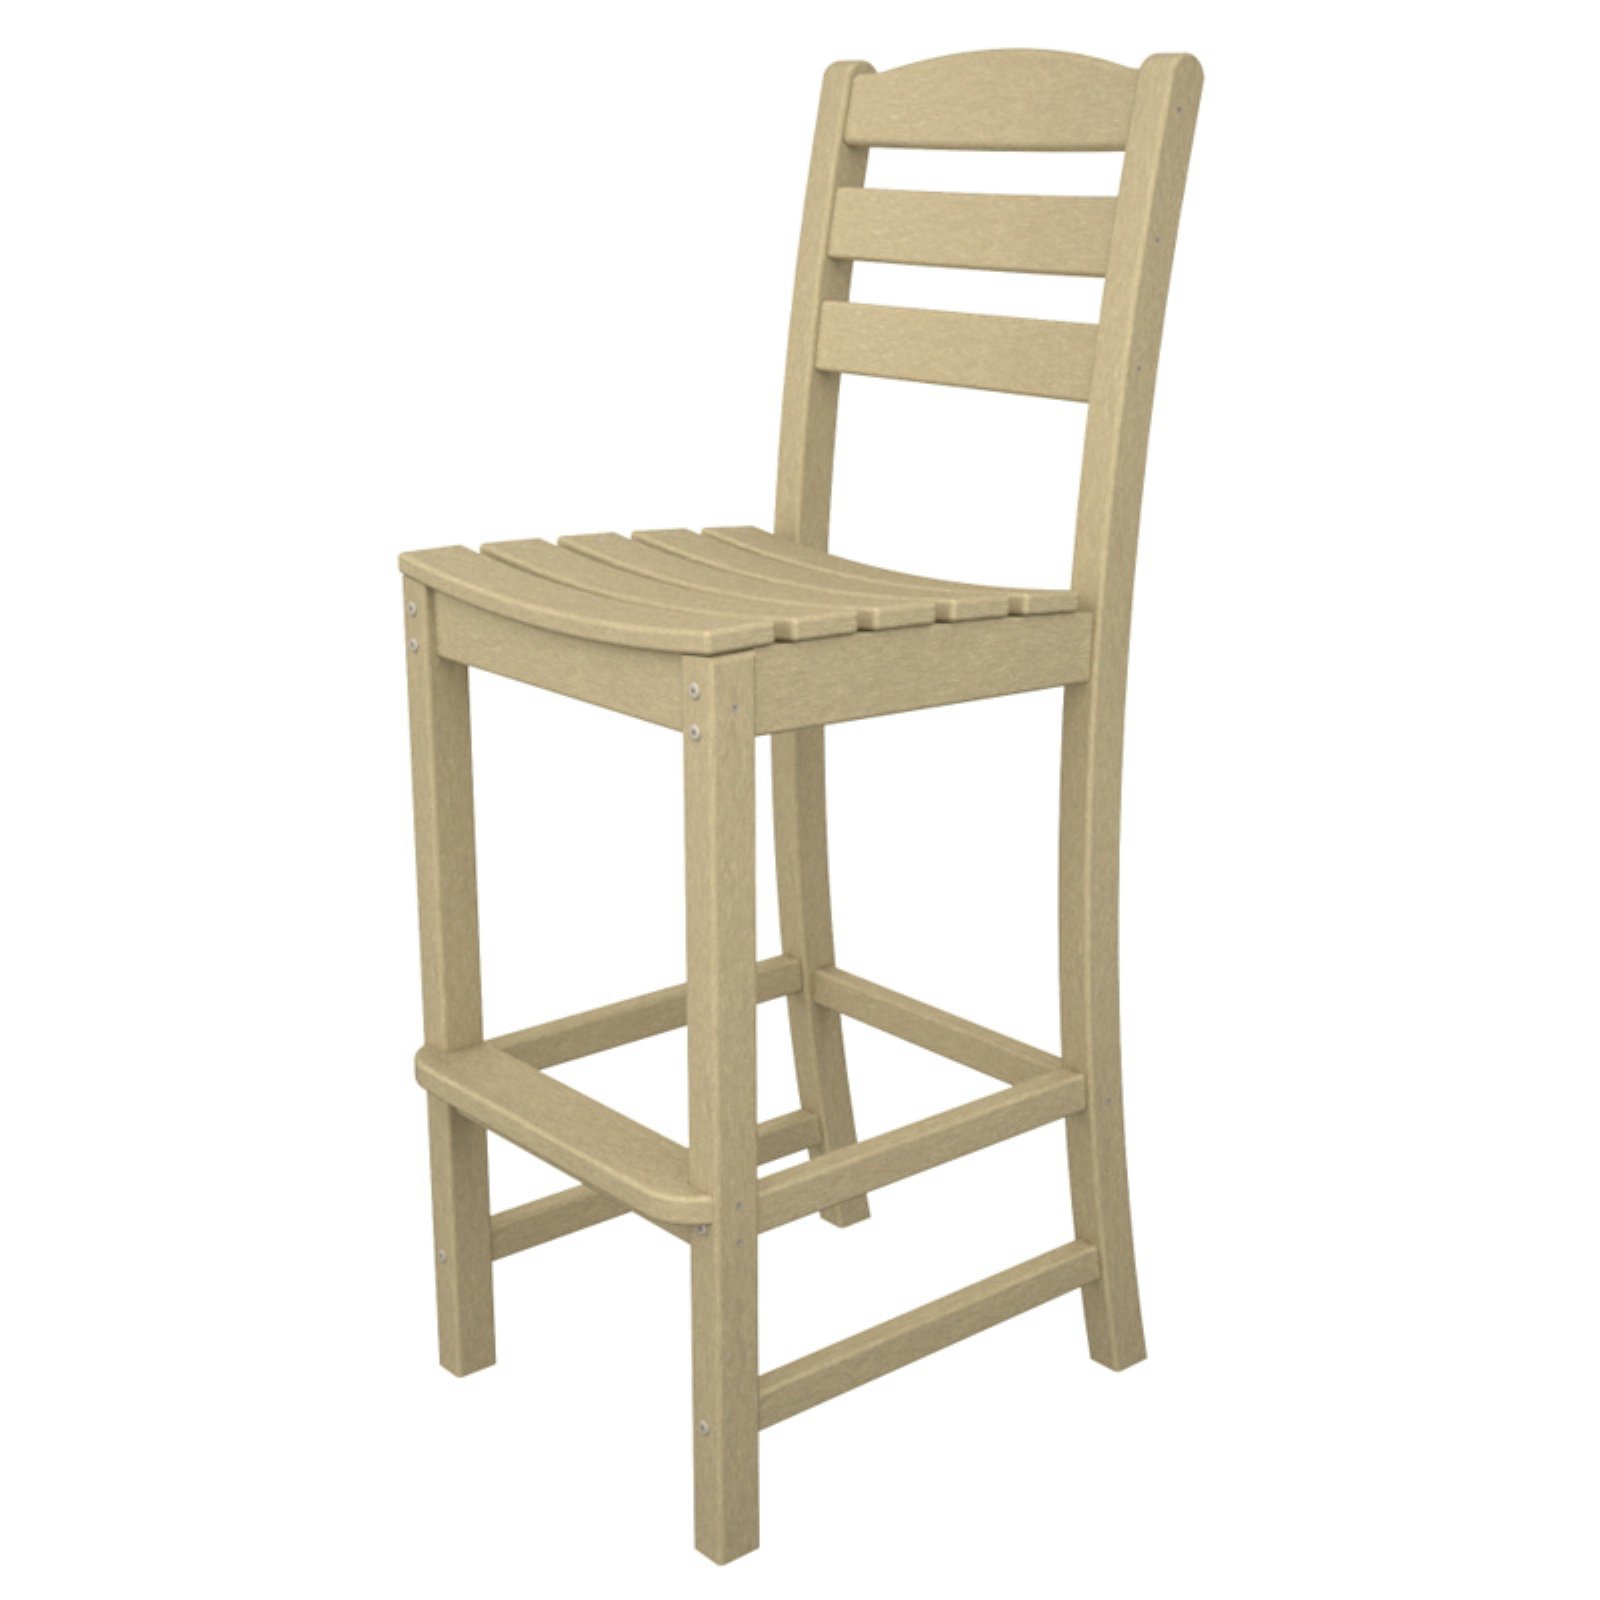 POLYWOOD&reg; La Casa Cafe Recycled Plastic Bar Height Side Chair - image 1 of 2